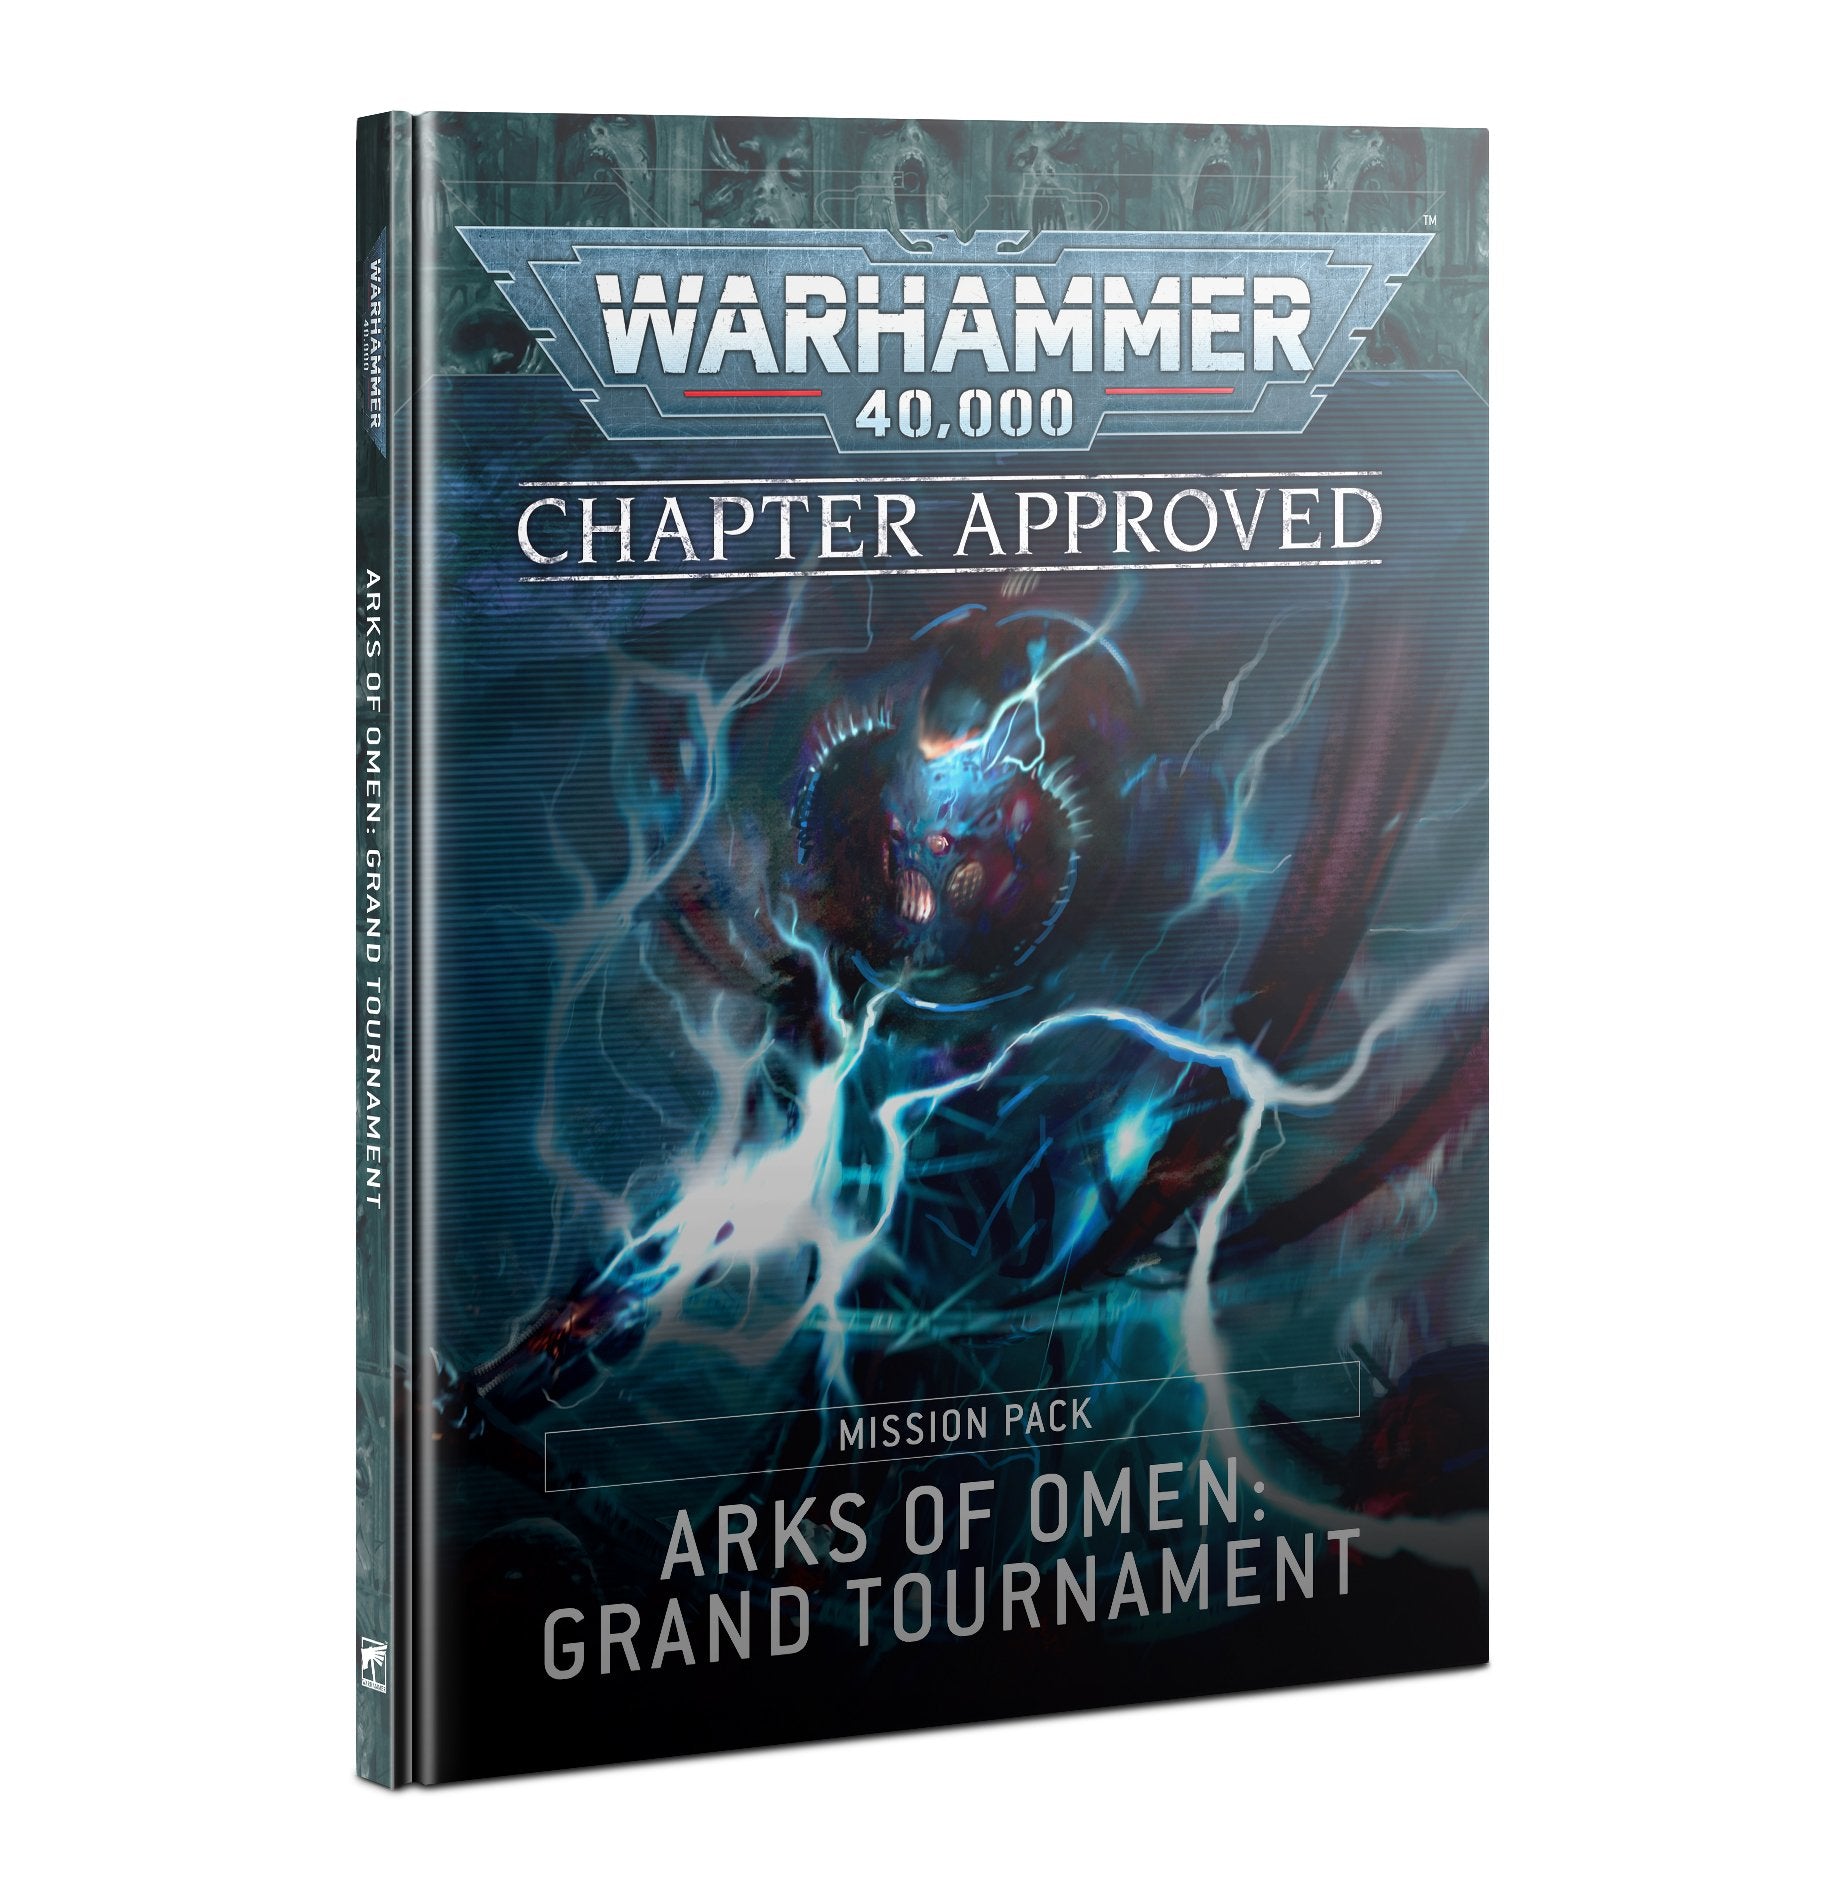 Warhammer 40,000 Chapter Approved: Mission Pack: Arks of Omen: Grand Tournament